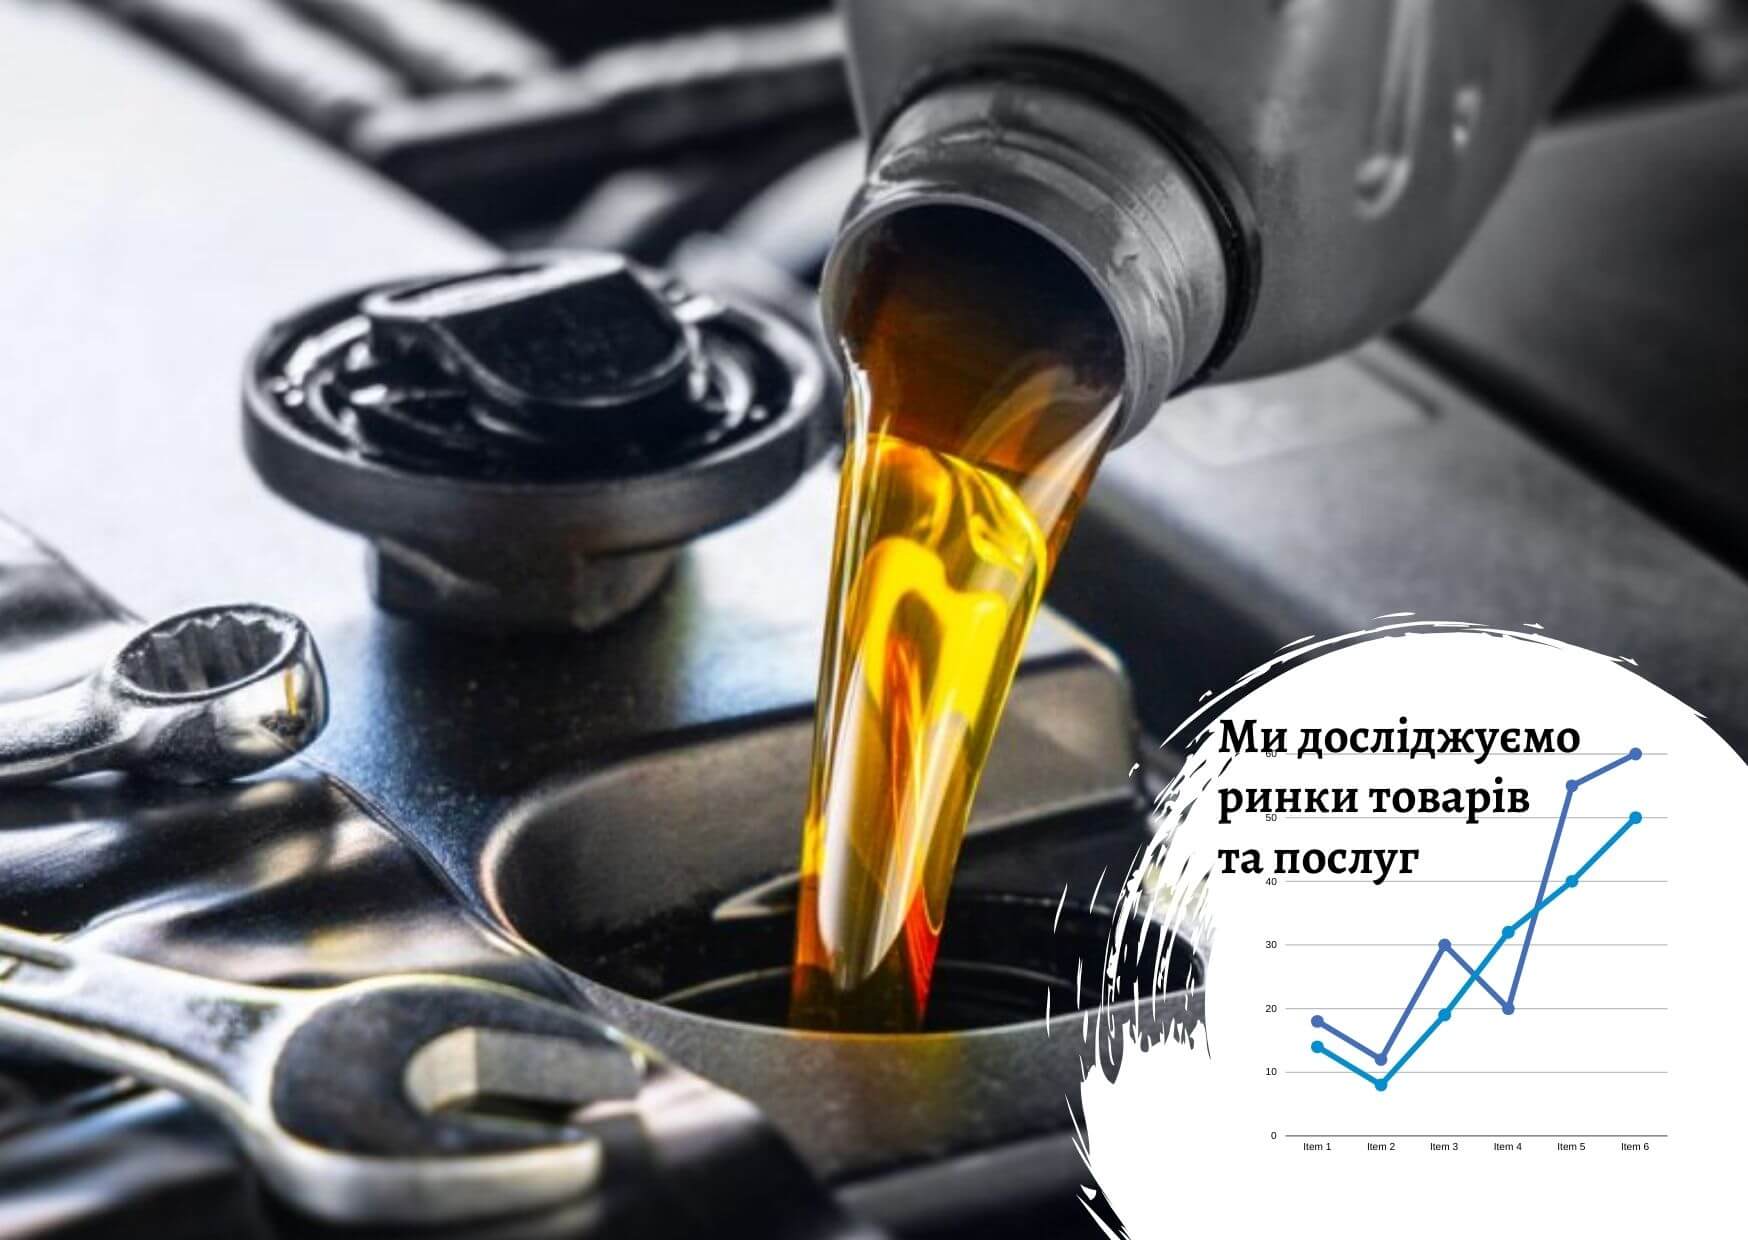 Ukrainian lubricants market: research by Pro-Consulting 